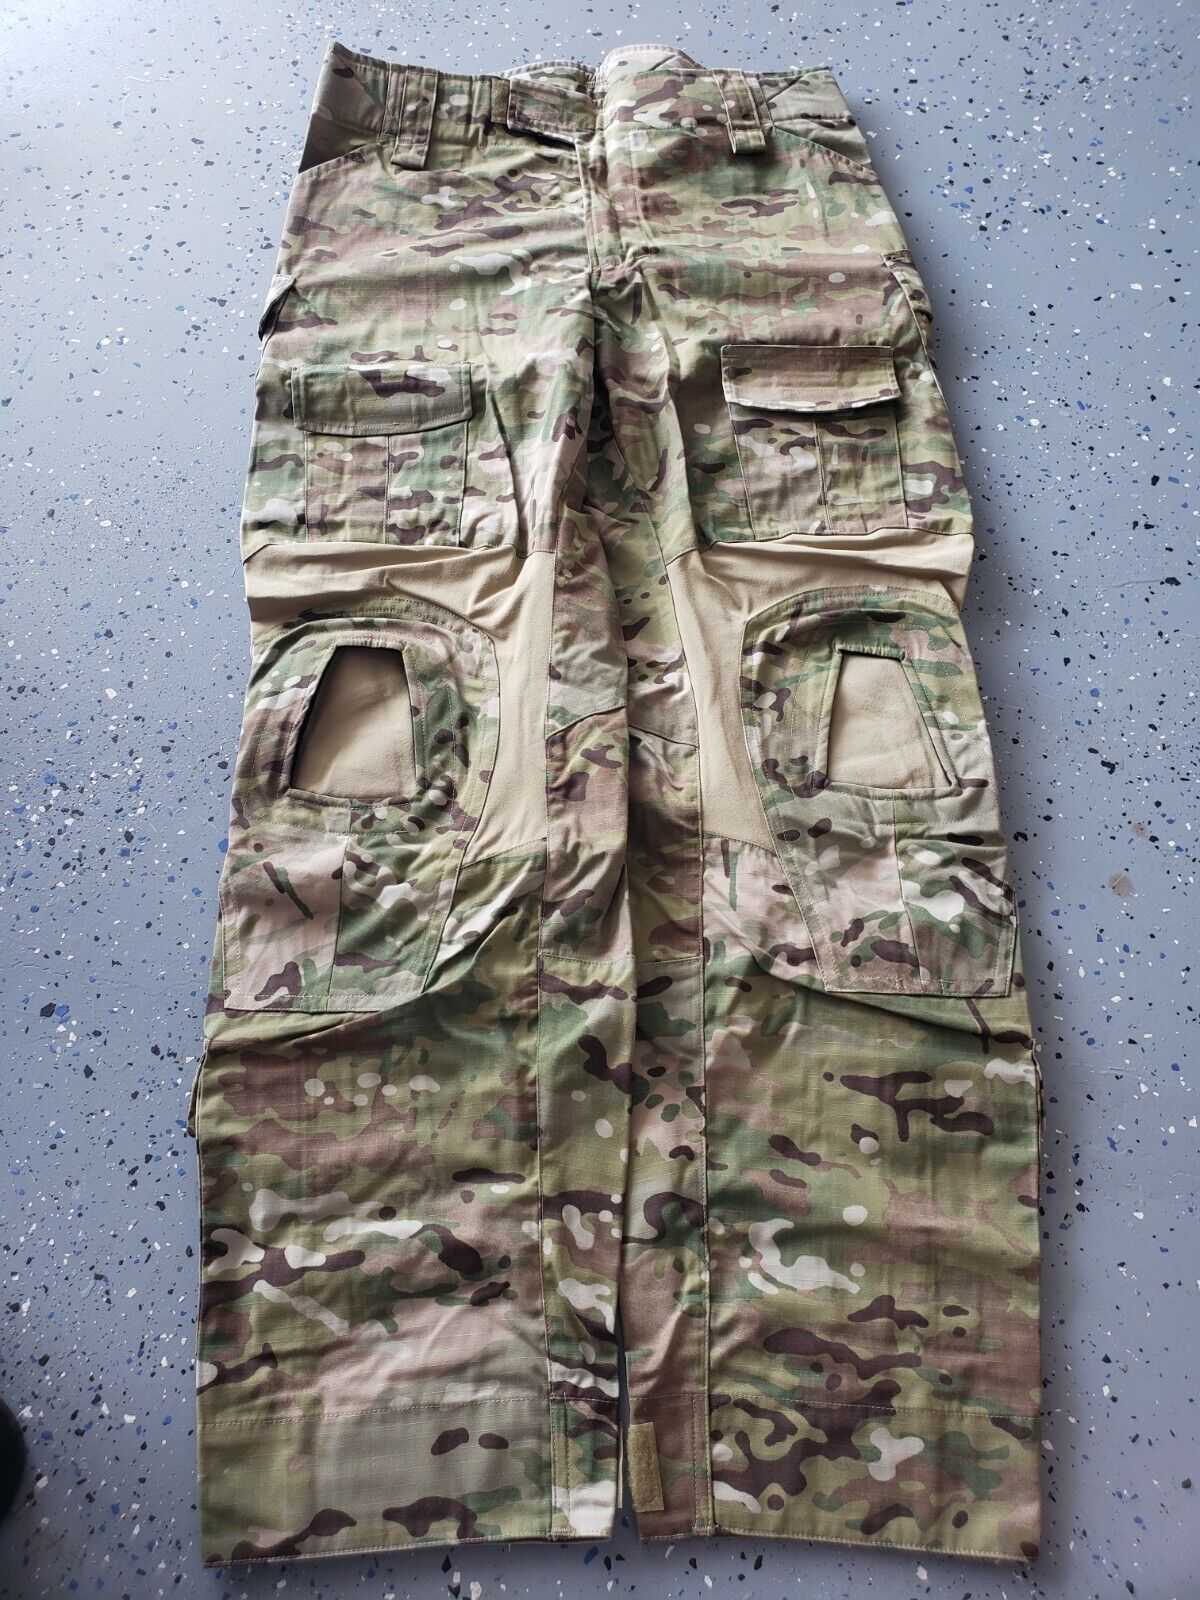 Crye Precision Combat Pants 34R, Brand New with knee pads 